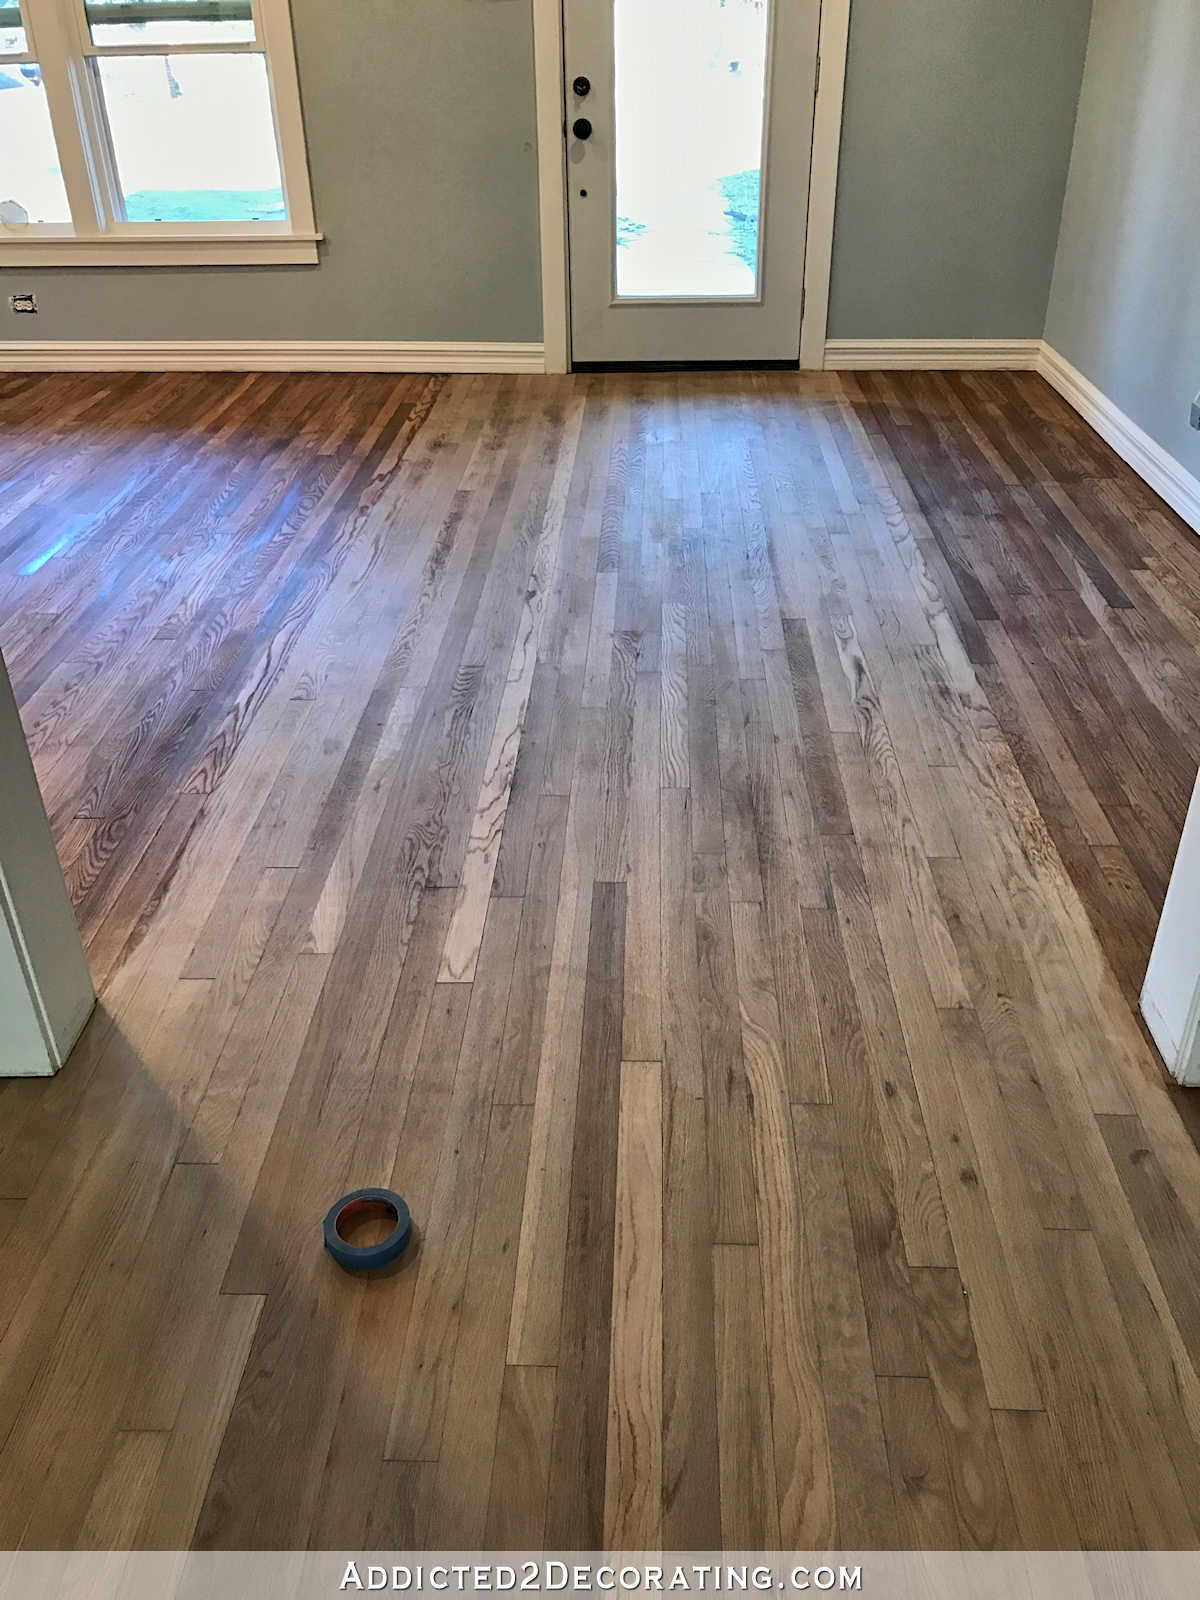 types of wood used for hardwood flooring of adventures in staining my red oak hardwood floors products process regarding staining red oak hardwood floors 4 entryway and living room wood conditioner